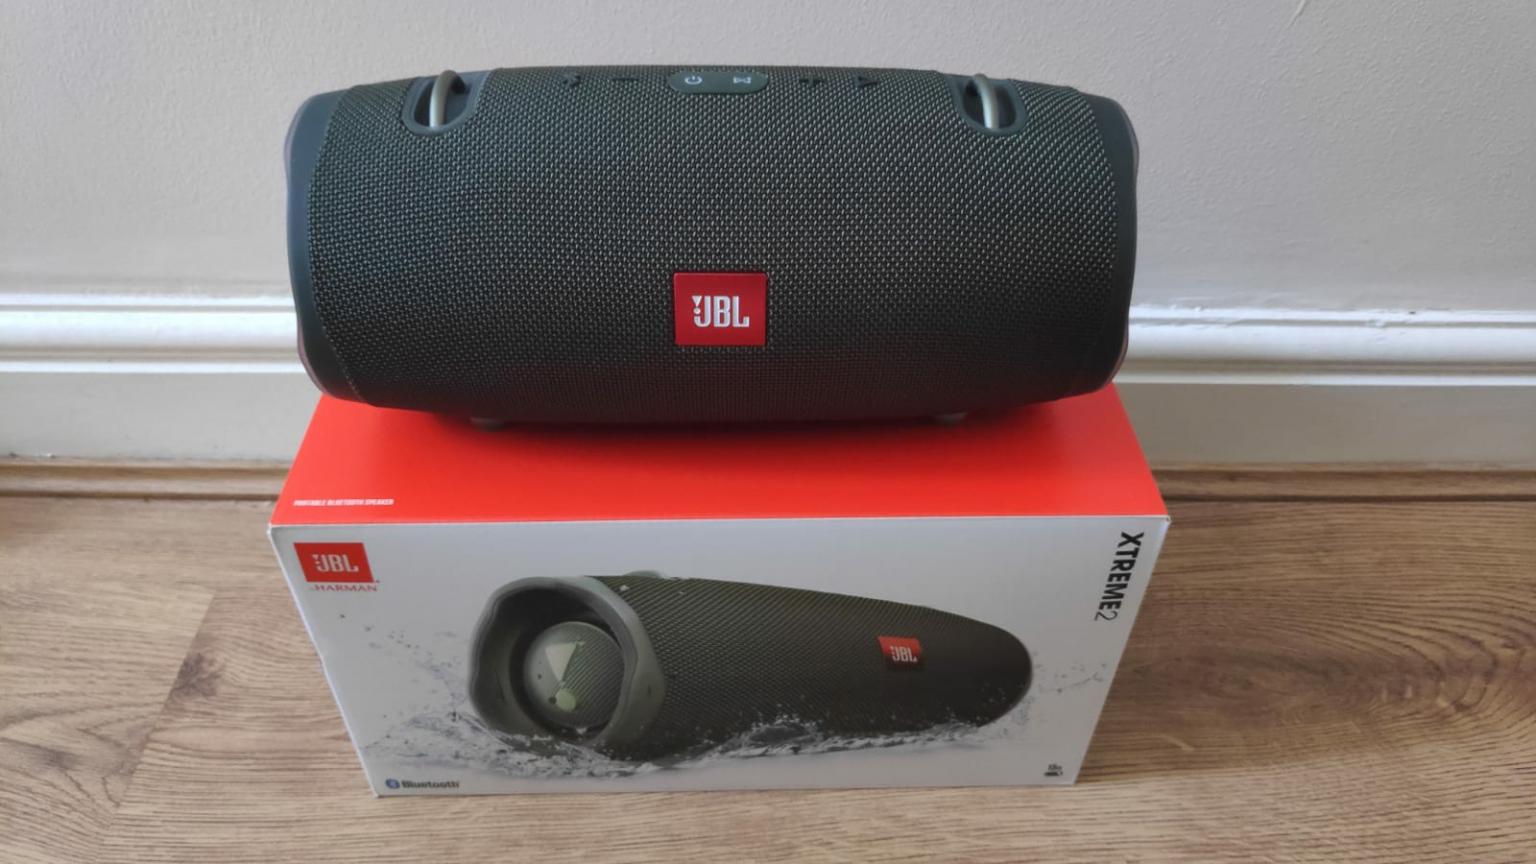 jbl xtreme for sale